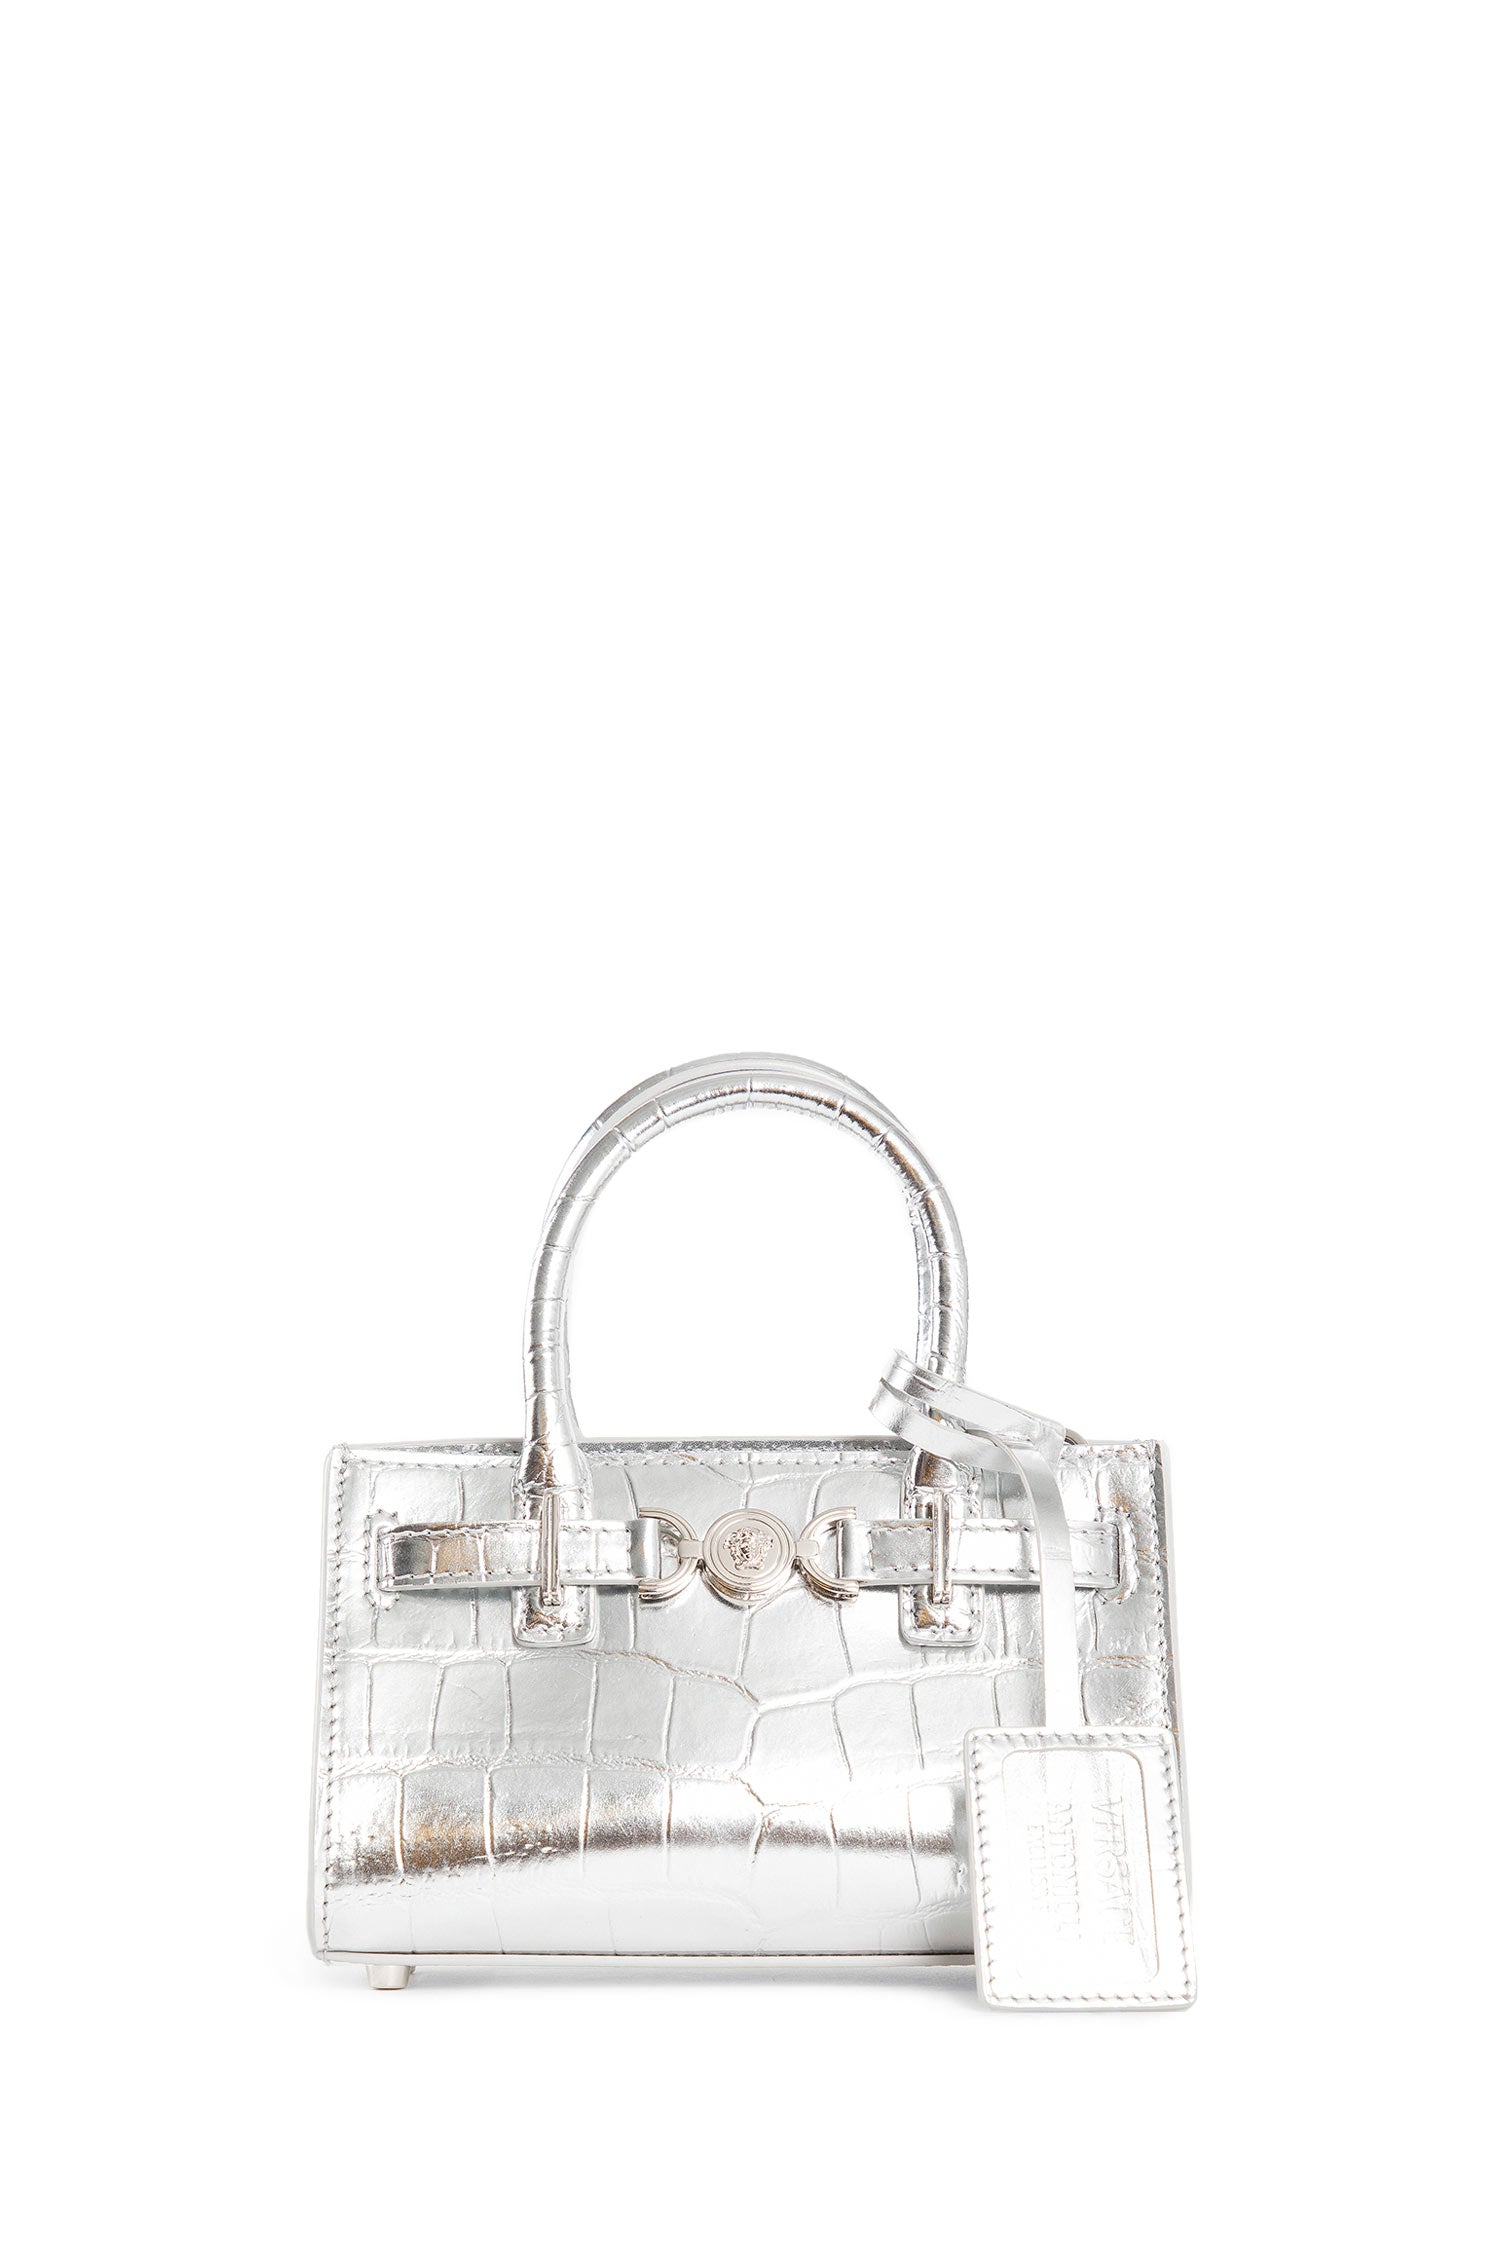 VERSACE WOMAN SILVER TOTE BAGS